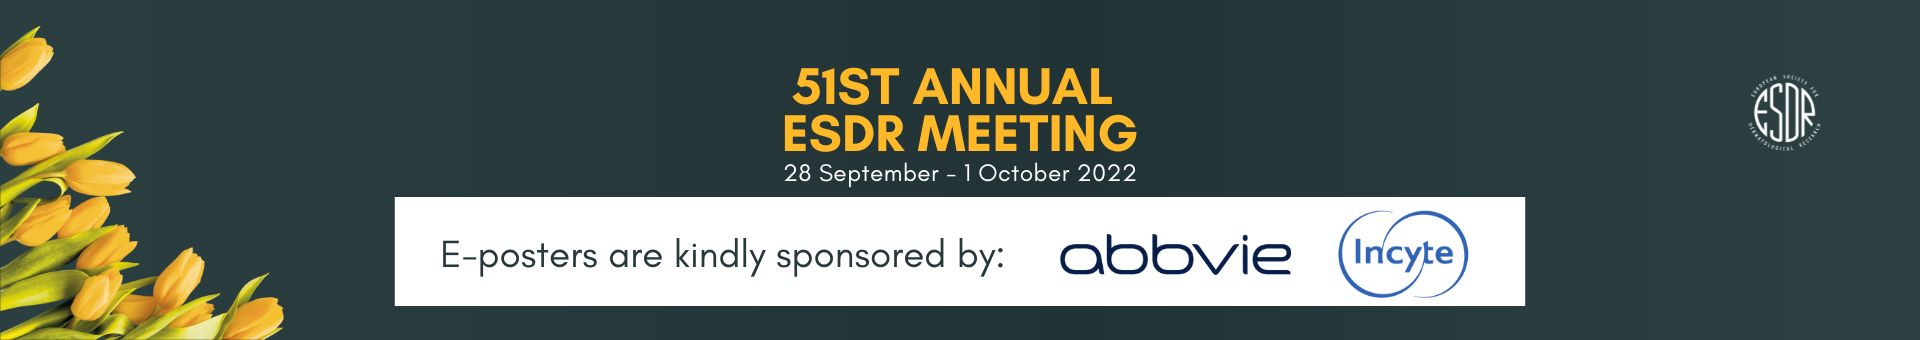 The banner to welcome you to 51st Annual ESDR Meeting 